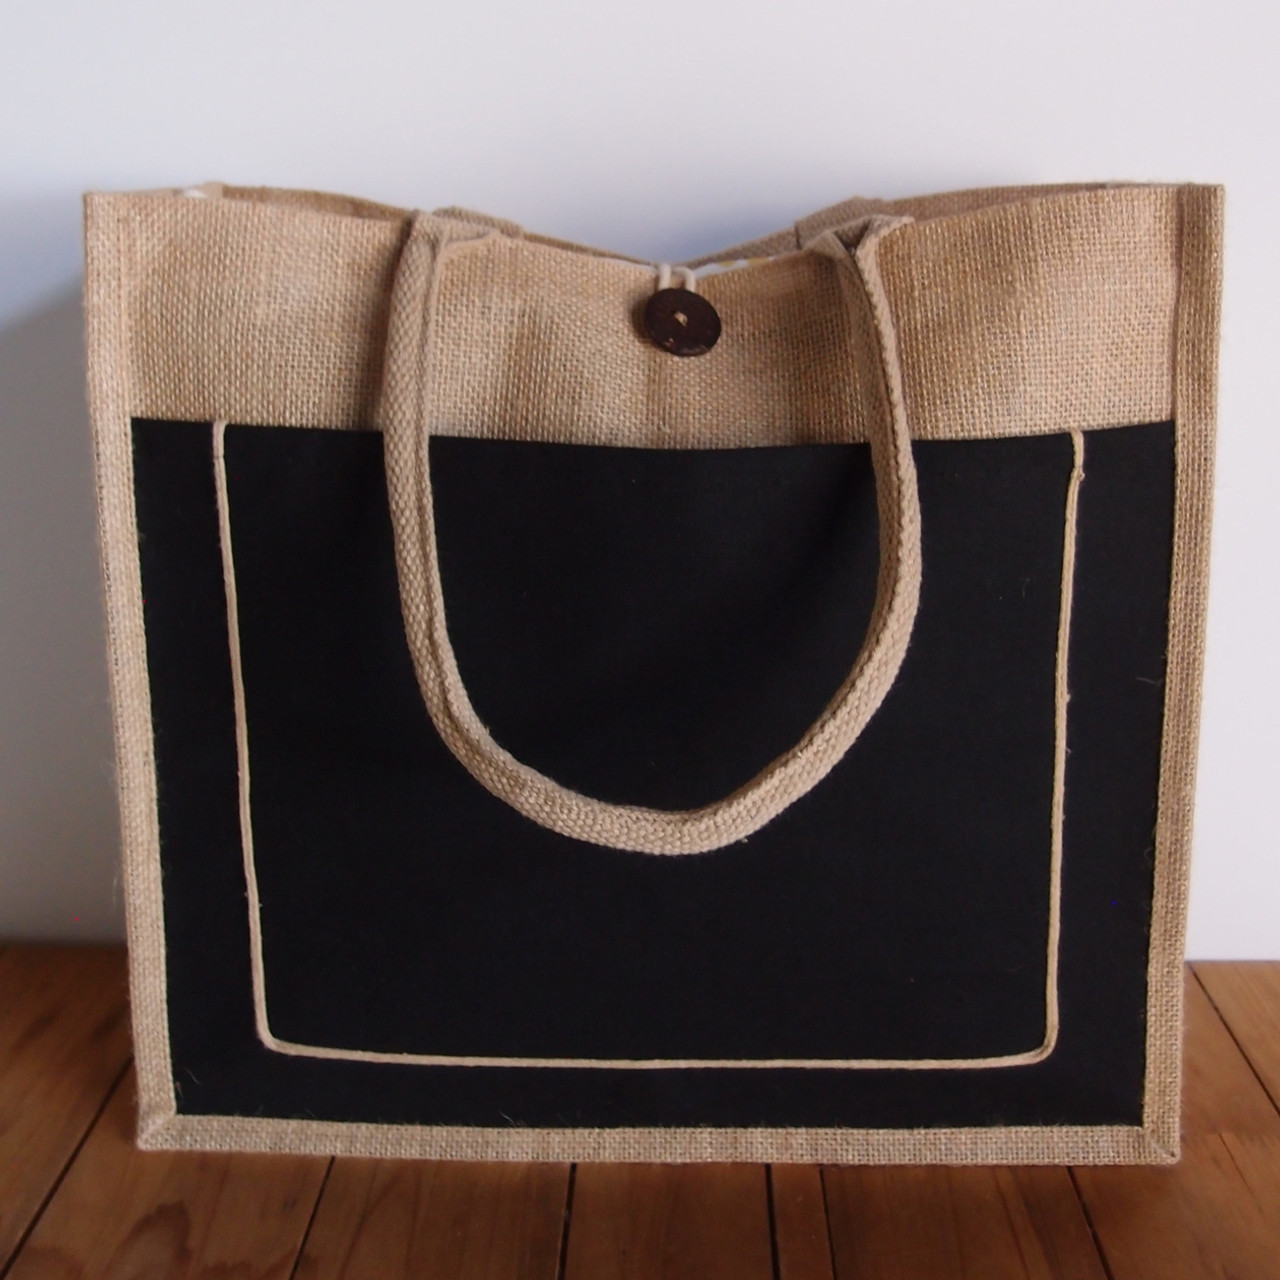 Jute Burlap Tote Bag with Black Pocket 15 ½ x 13 ¾ x 6 inches